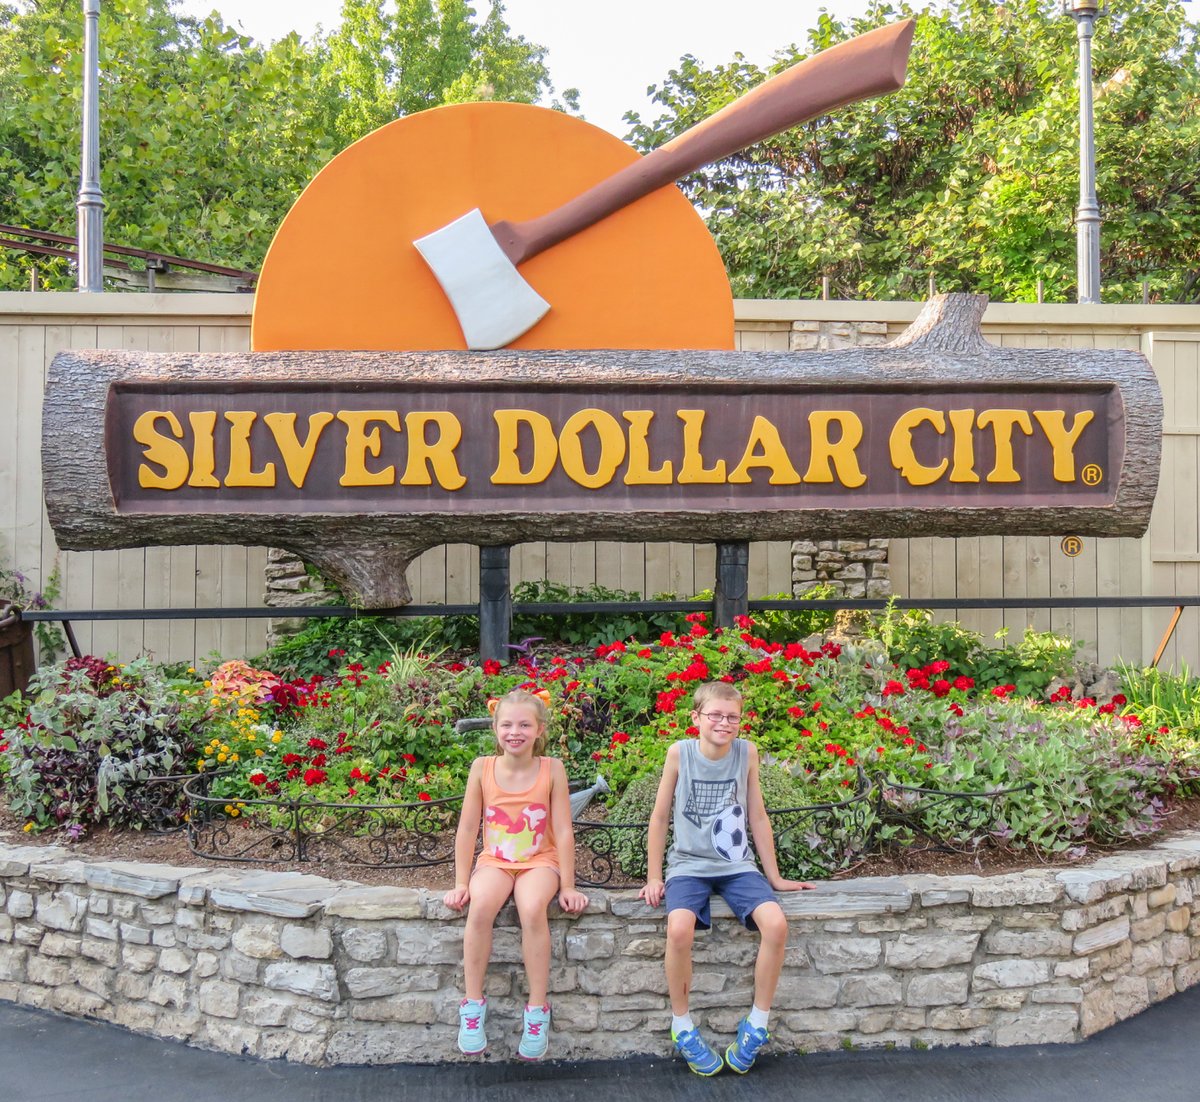 What's a special family vacation you remember? A trip to the Ozarks and Silver Dollar City is always a good one for us. @SDCAttractions #familytravel #SilverDollarCity #BransonMO